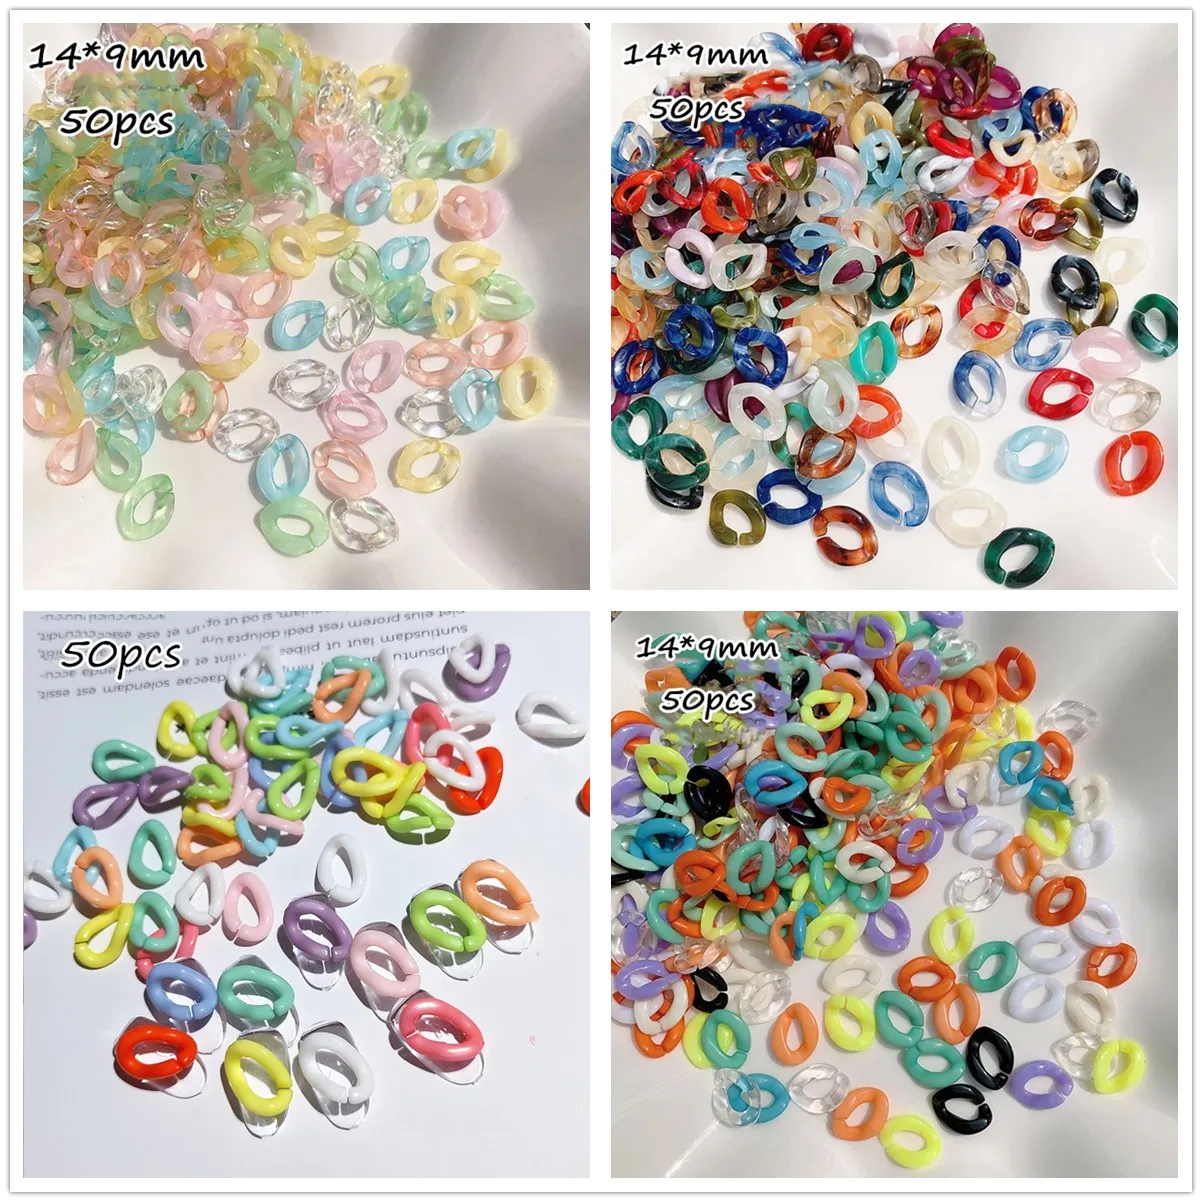 50pcs Mixed Chain Clear Nail Art Decorations 3D Jelly Nail Charms Vintage DIY Macaroon Manicure Flat Colorful Ring Accessories